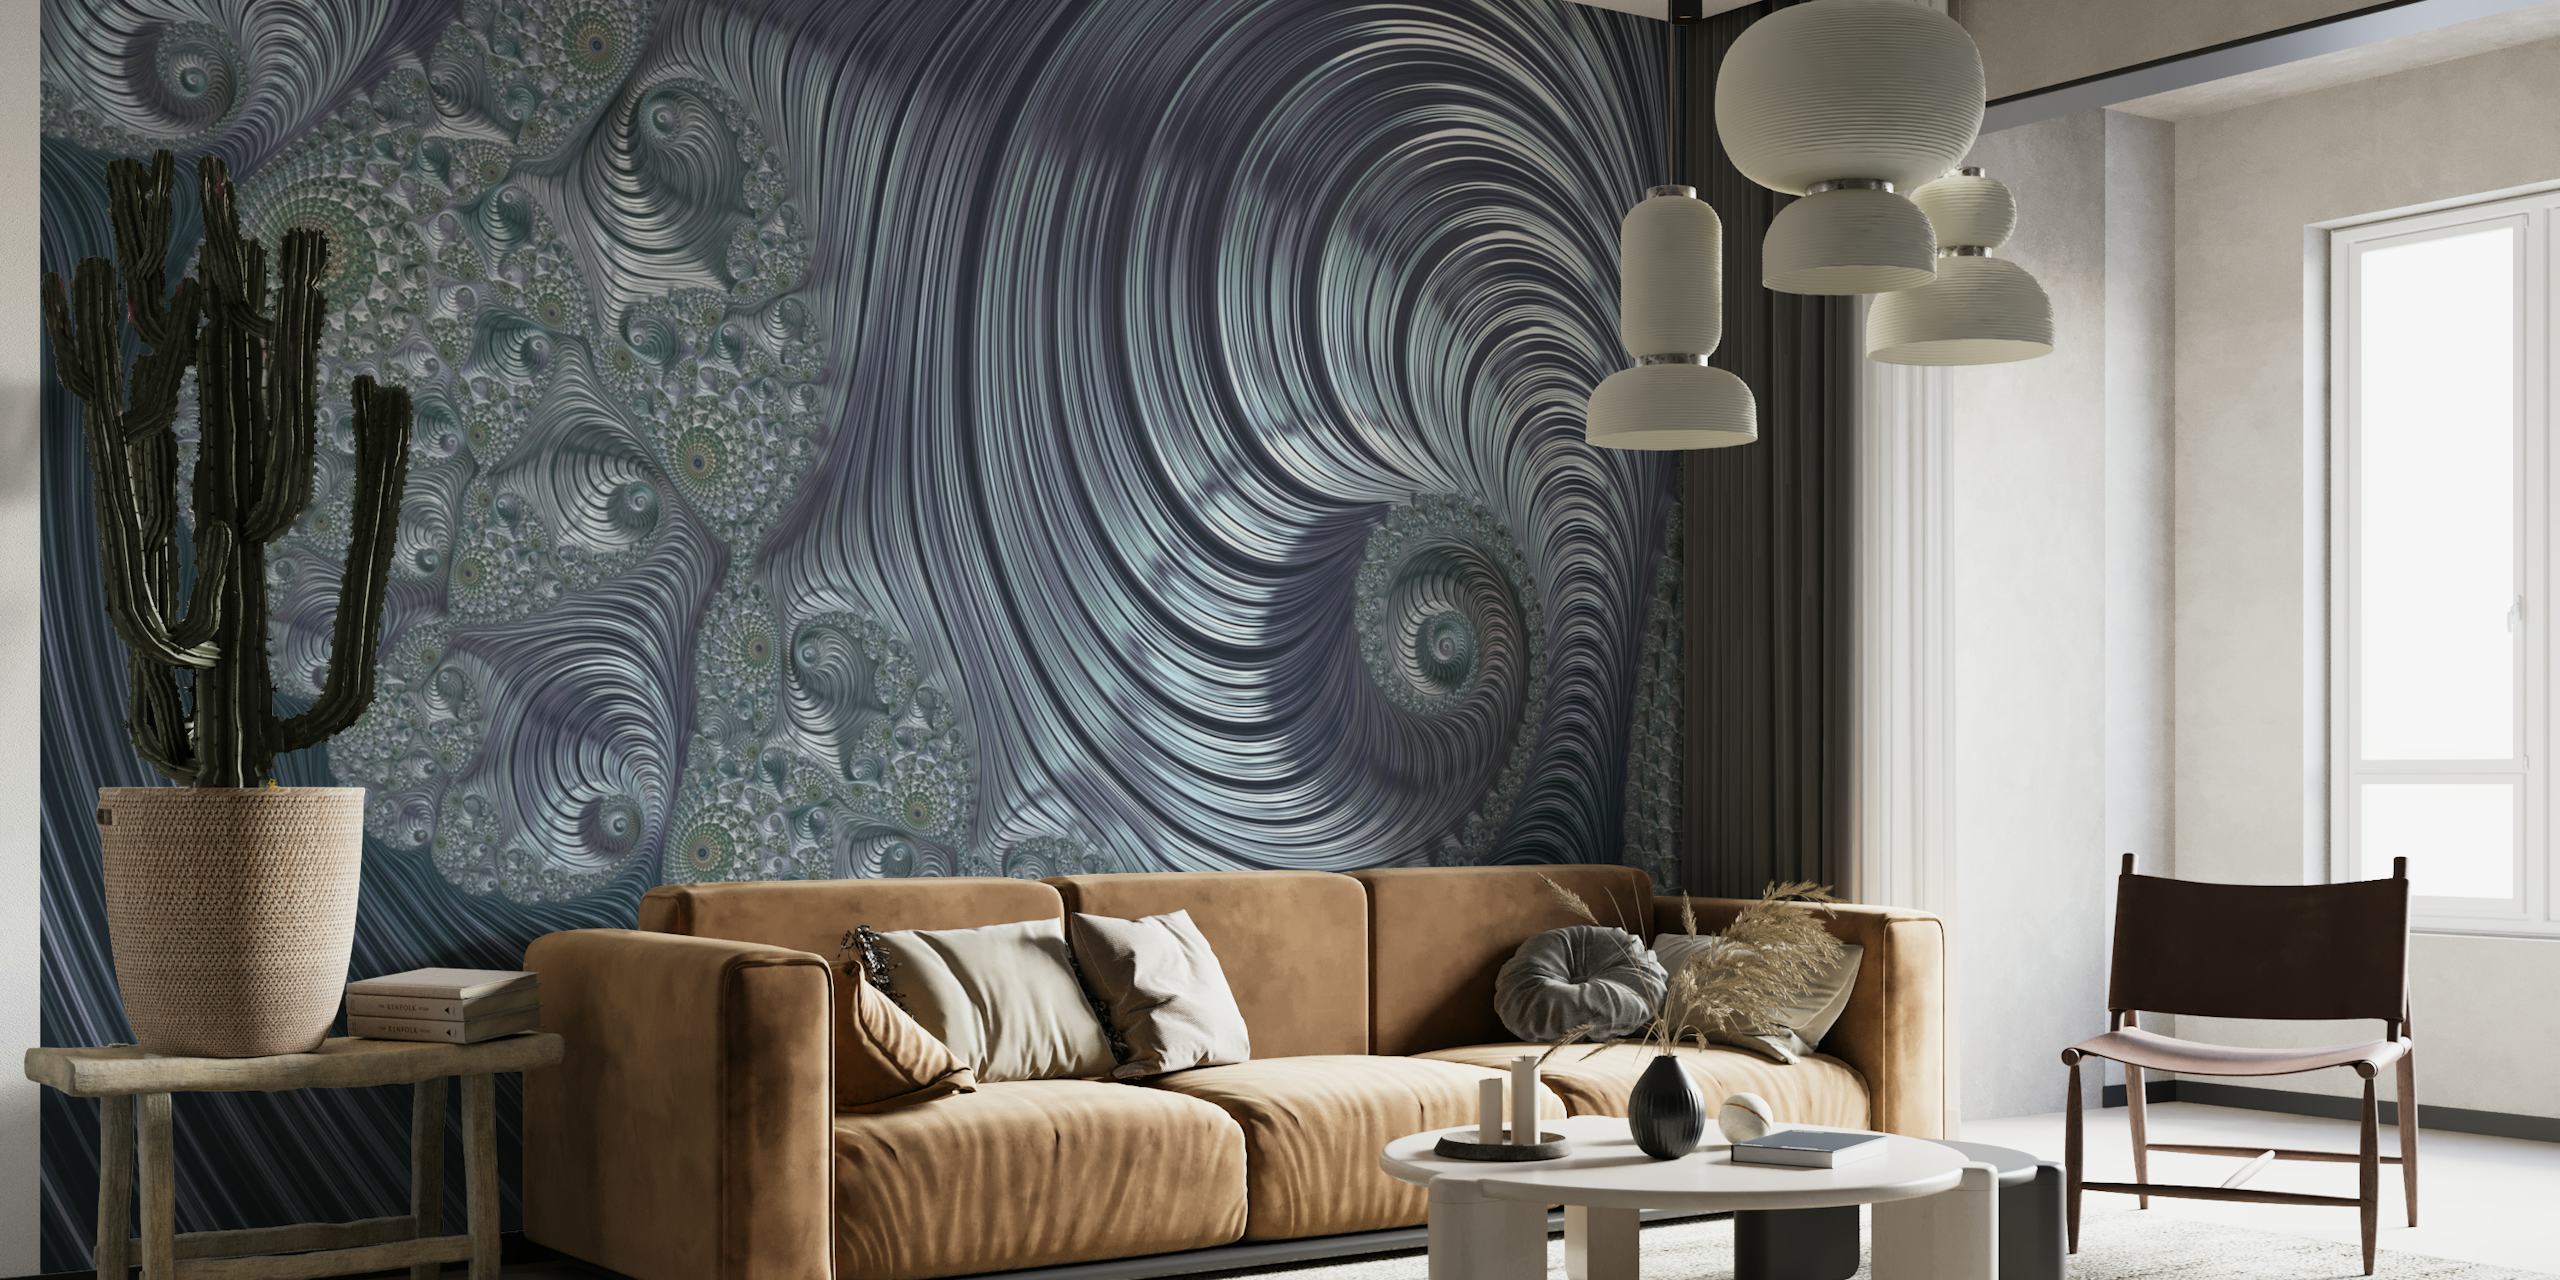 Fractal Fantasies Silver Blue wall mural with swirling patterns in silver and blue